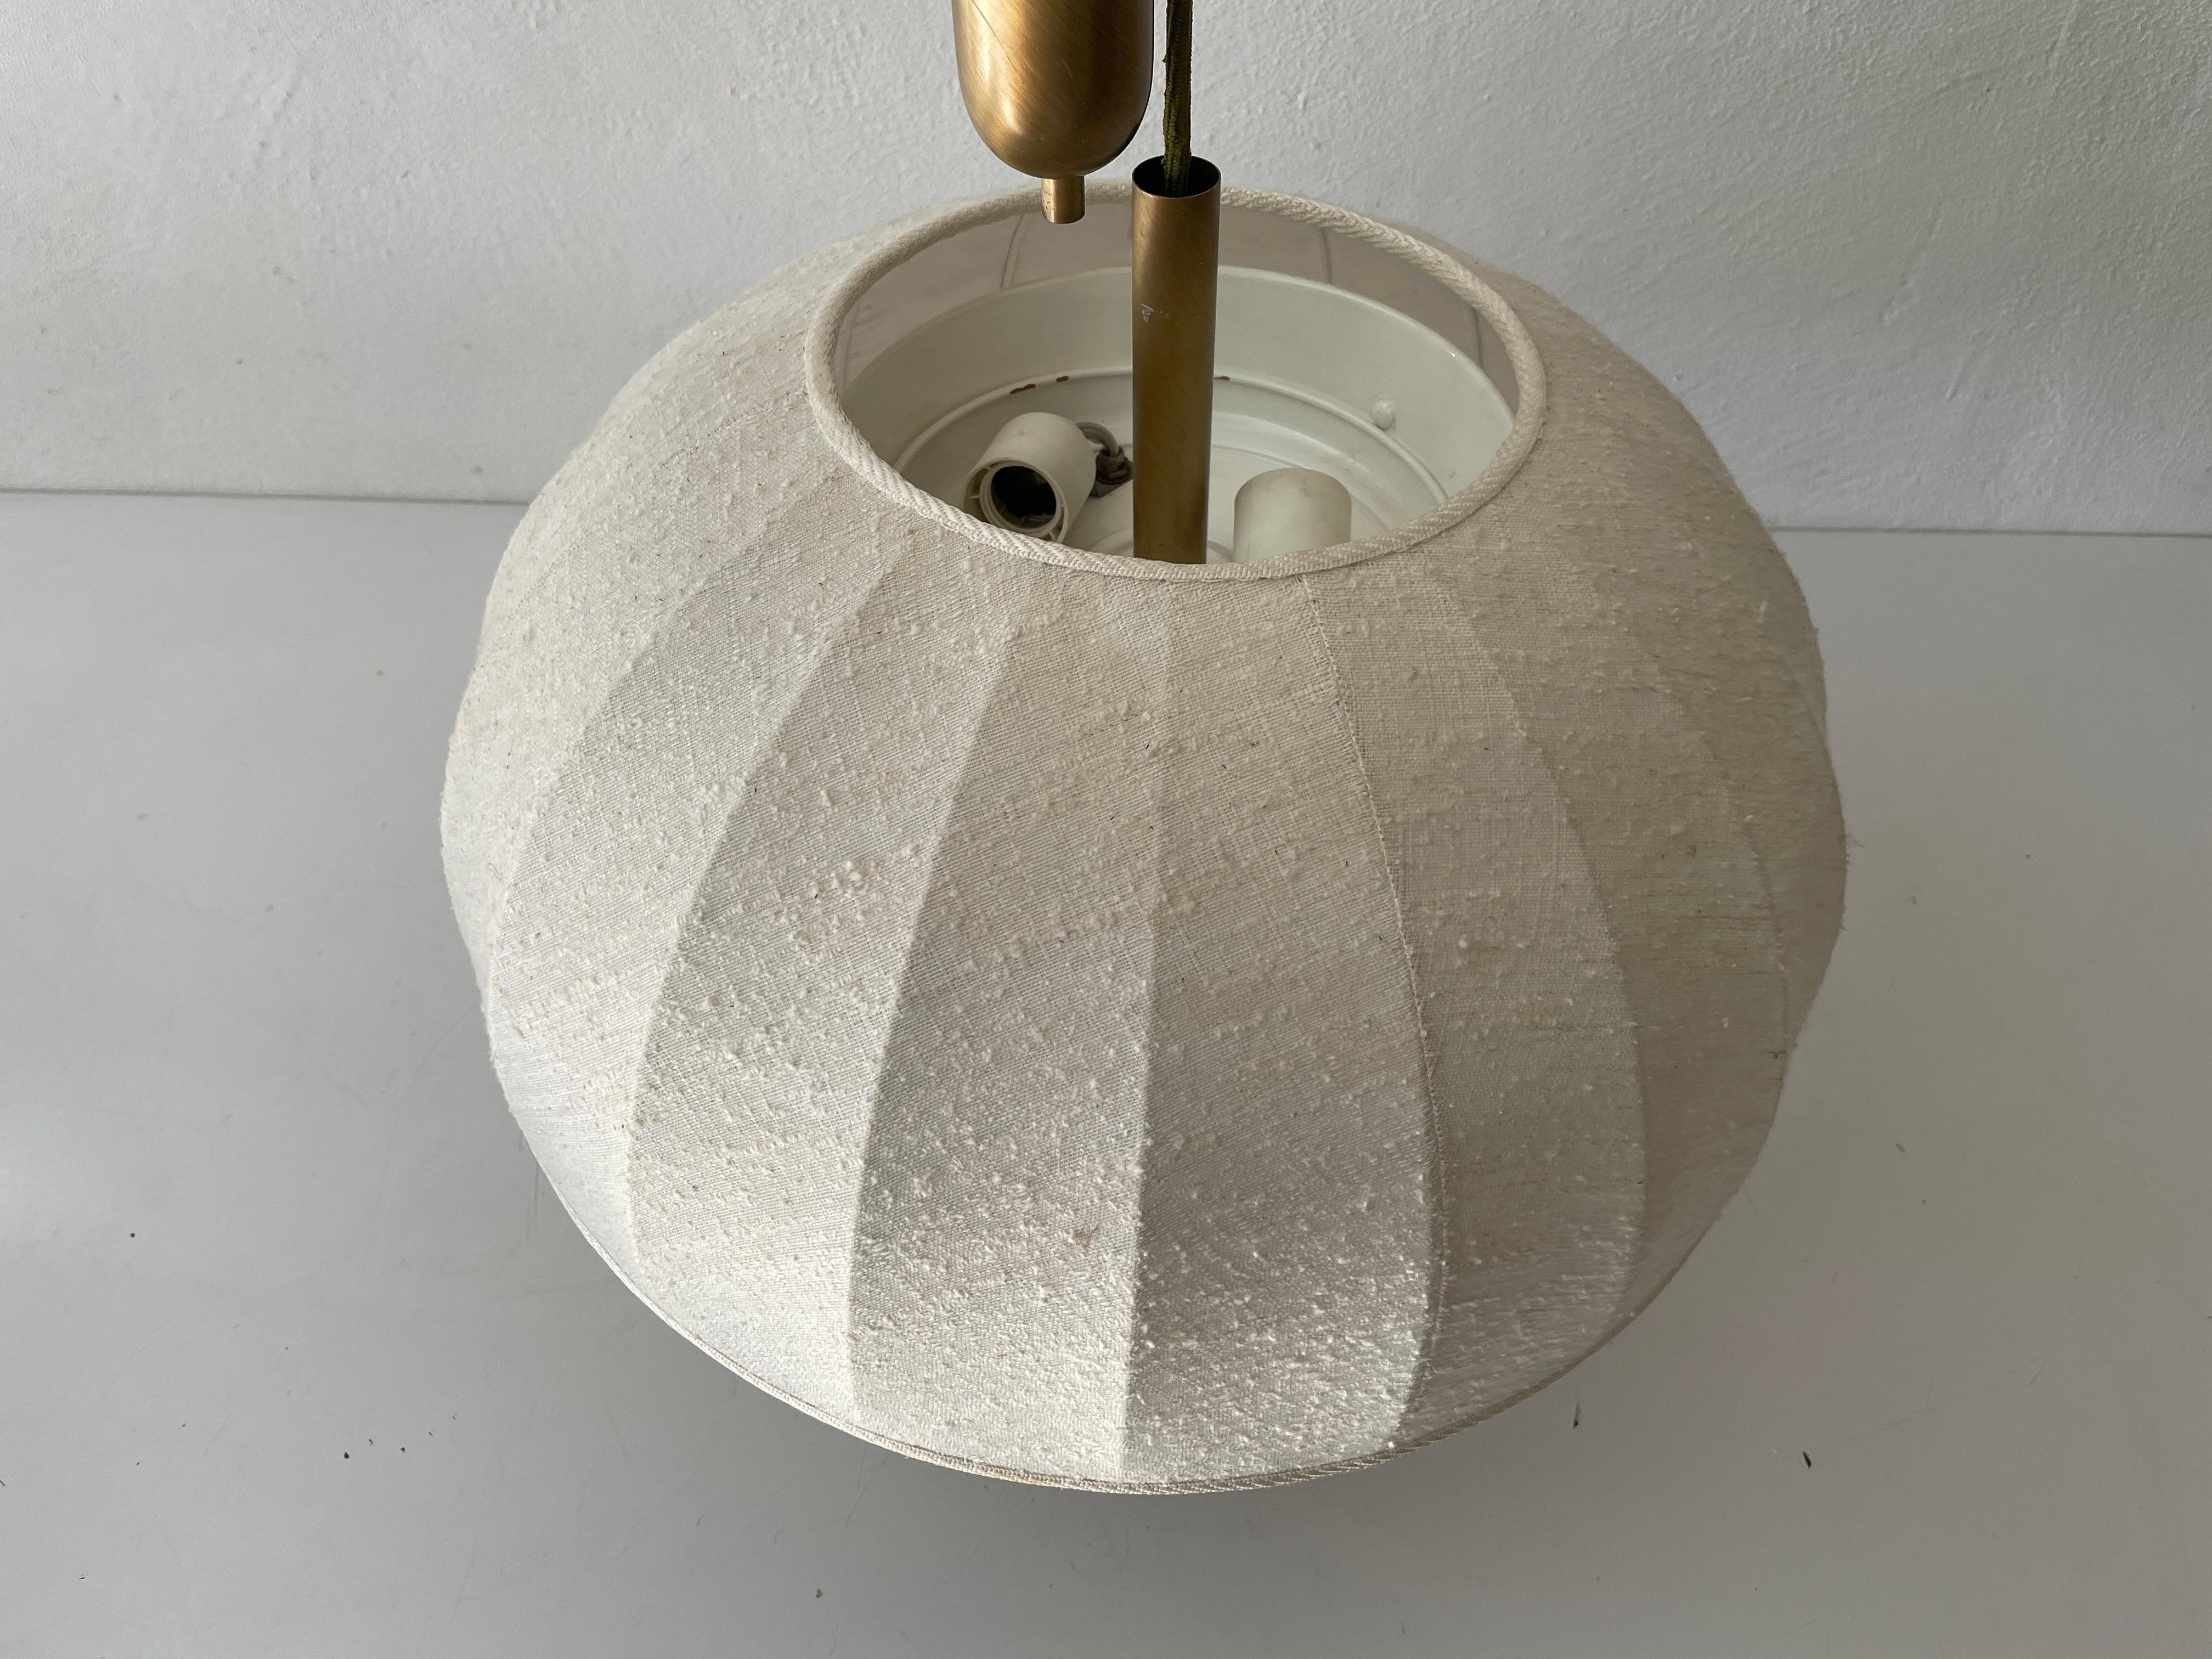 Adjustable large lampshade.
Brass body & fabric shade
Manufactured in Germany
This lamp works with 5 x E27 light bulbs.
Measurements:
Shade diameter and height: 50 cm and 36 cm
Height between 120 cm and 90 cm